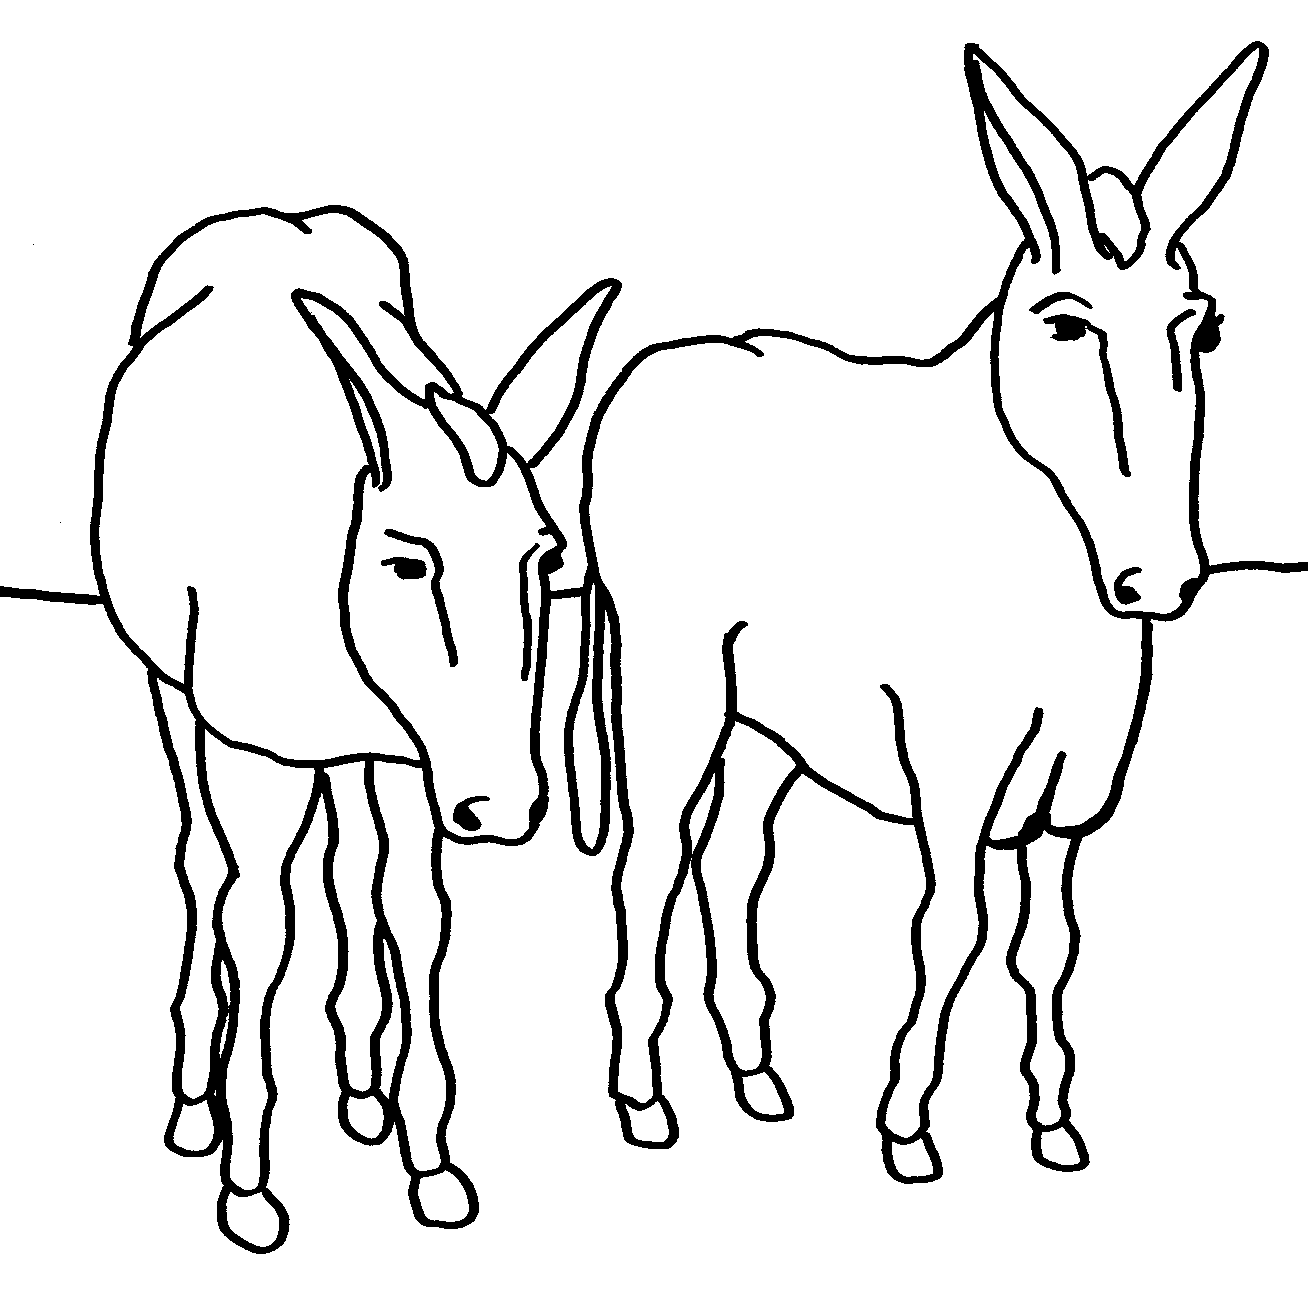 Coloring page: Donkey (Animals) #538 - Printable coloring pages